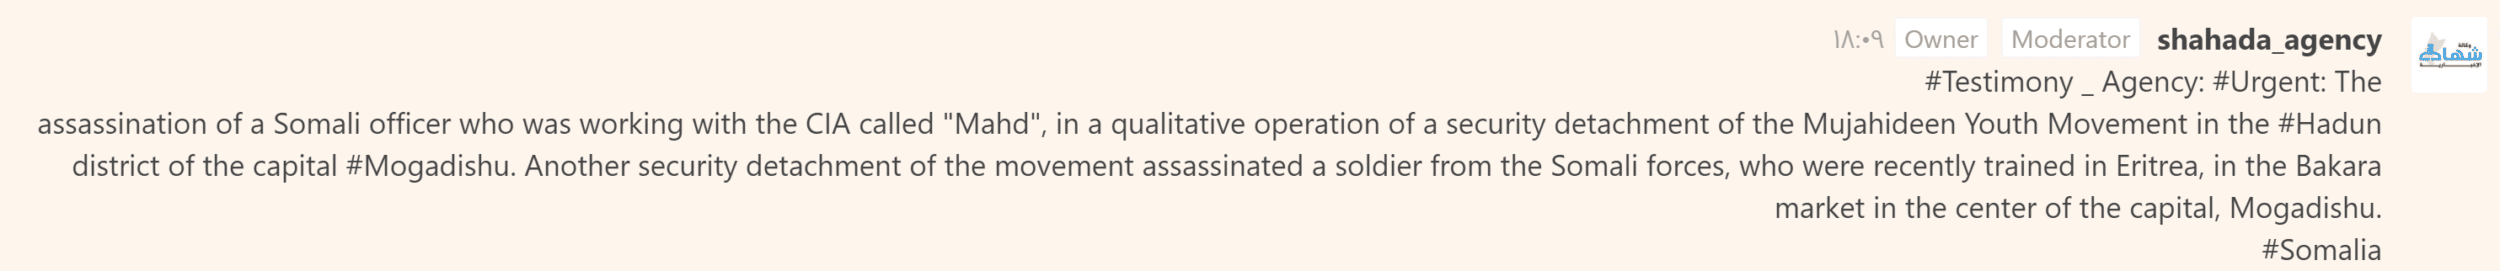 (Claim) al-Shabaab Assassinated a Somalian Officer Who Worked With the CIA Named Mahd in Hodan District in Addition to a Soldier in Bakara Market, Mogadishu, Somalia - 7 February 2023